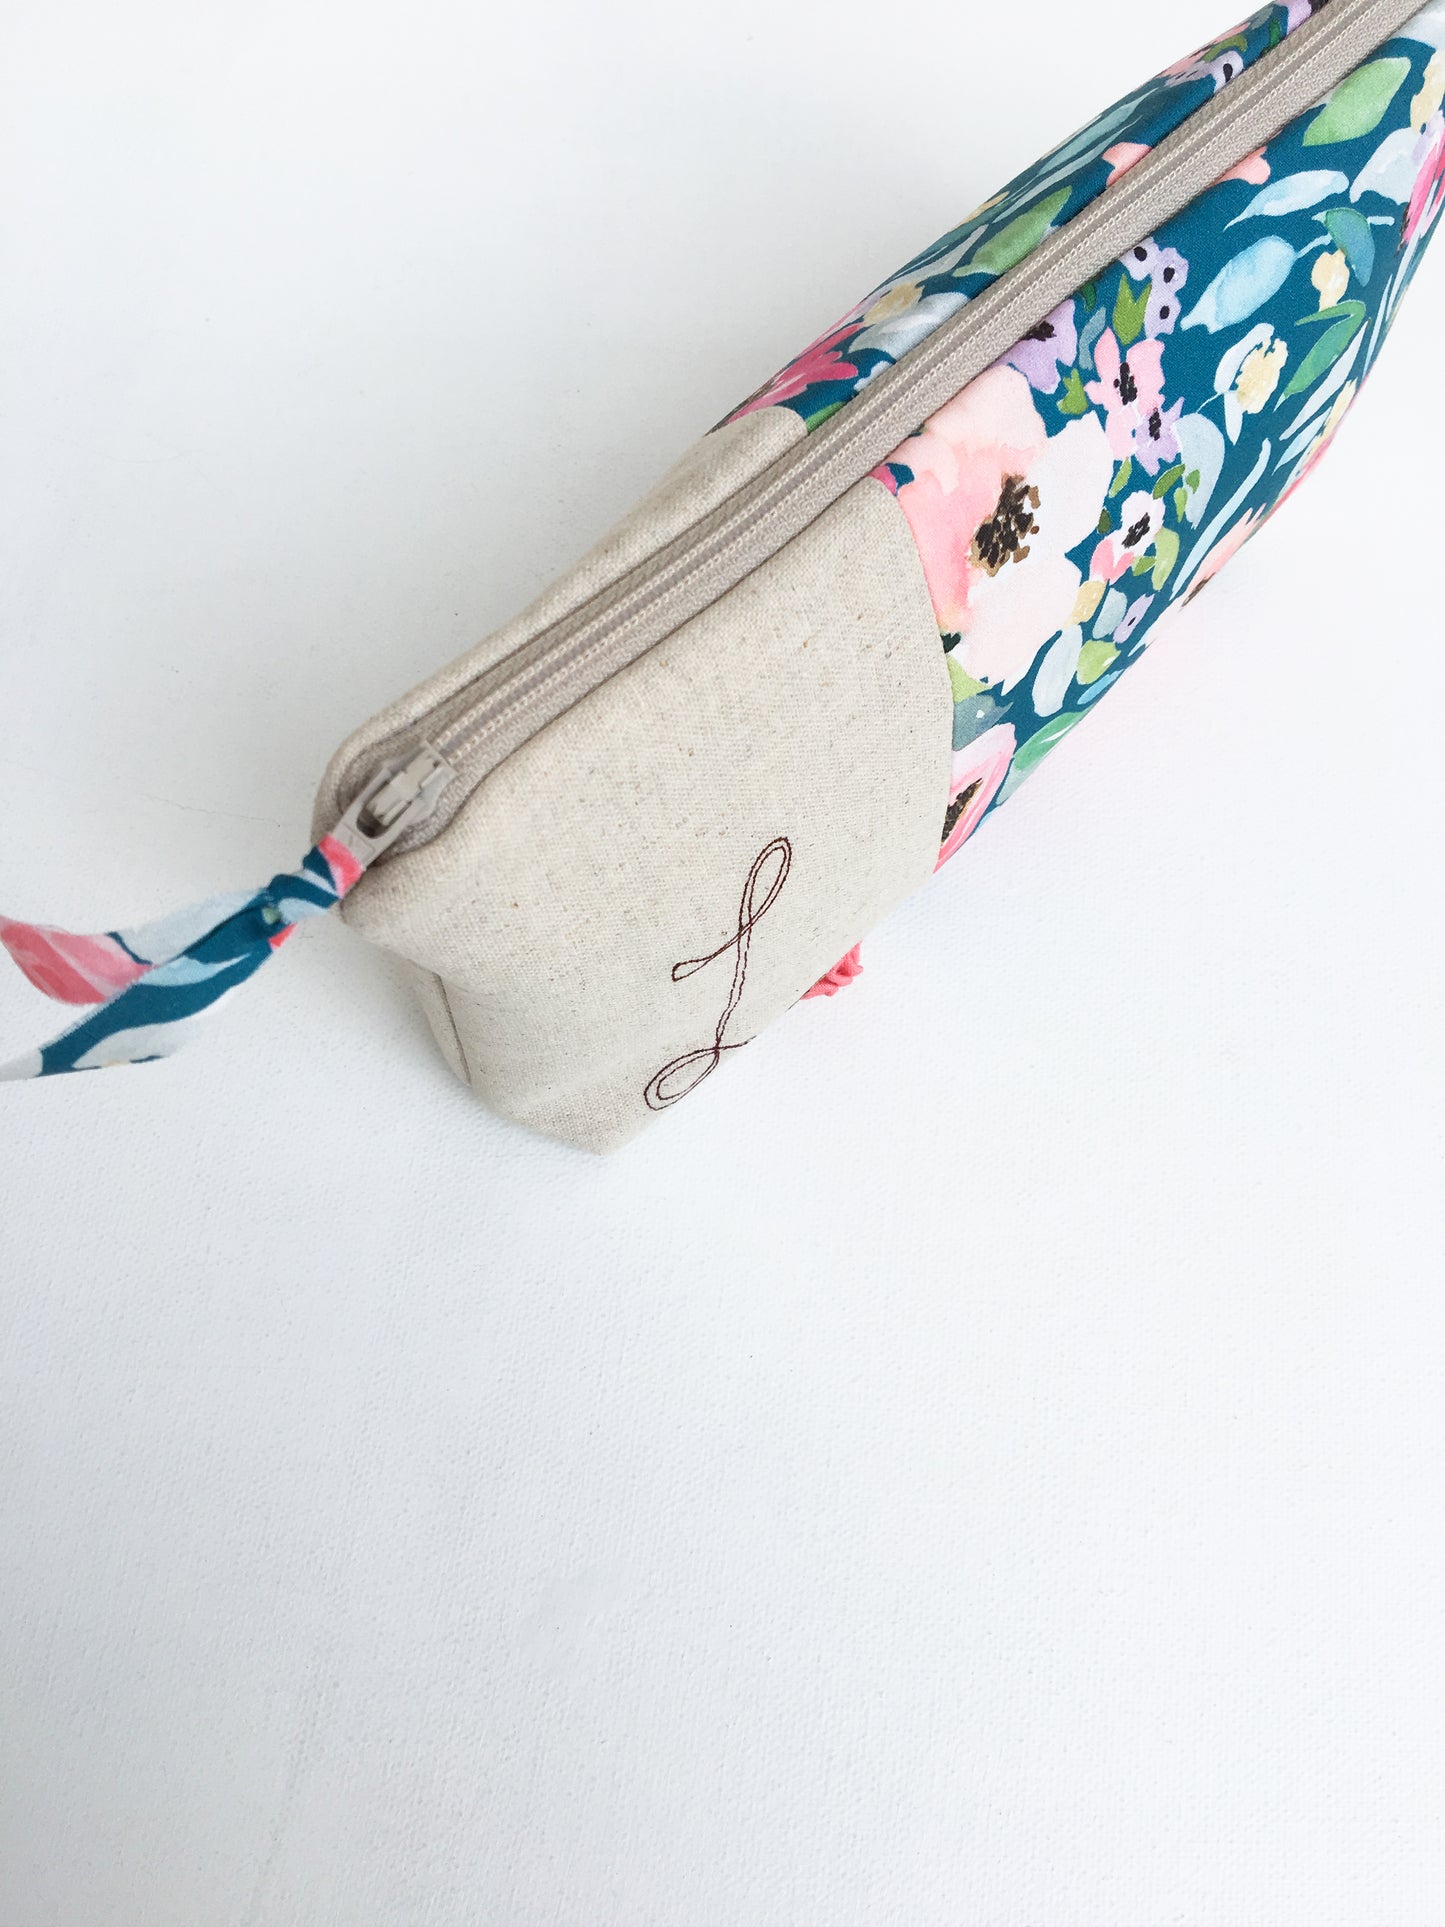 Floral Personalized Cosmetic Bag